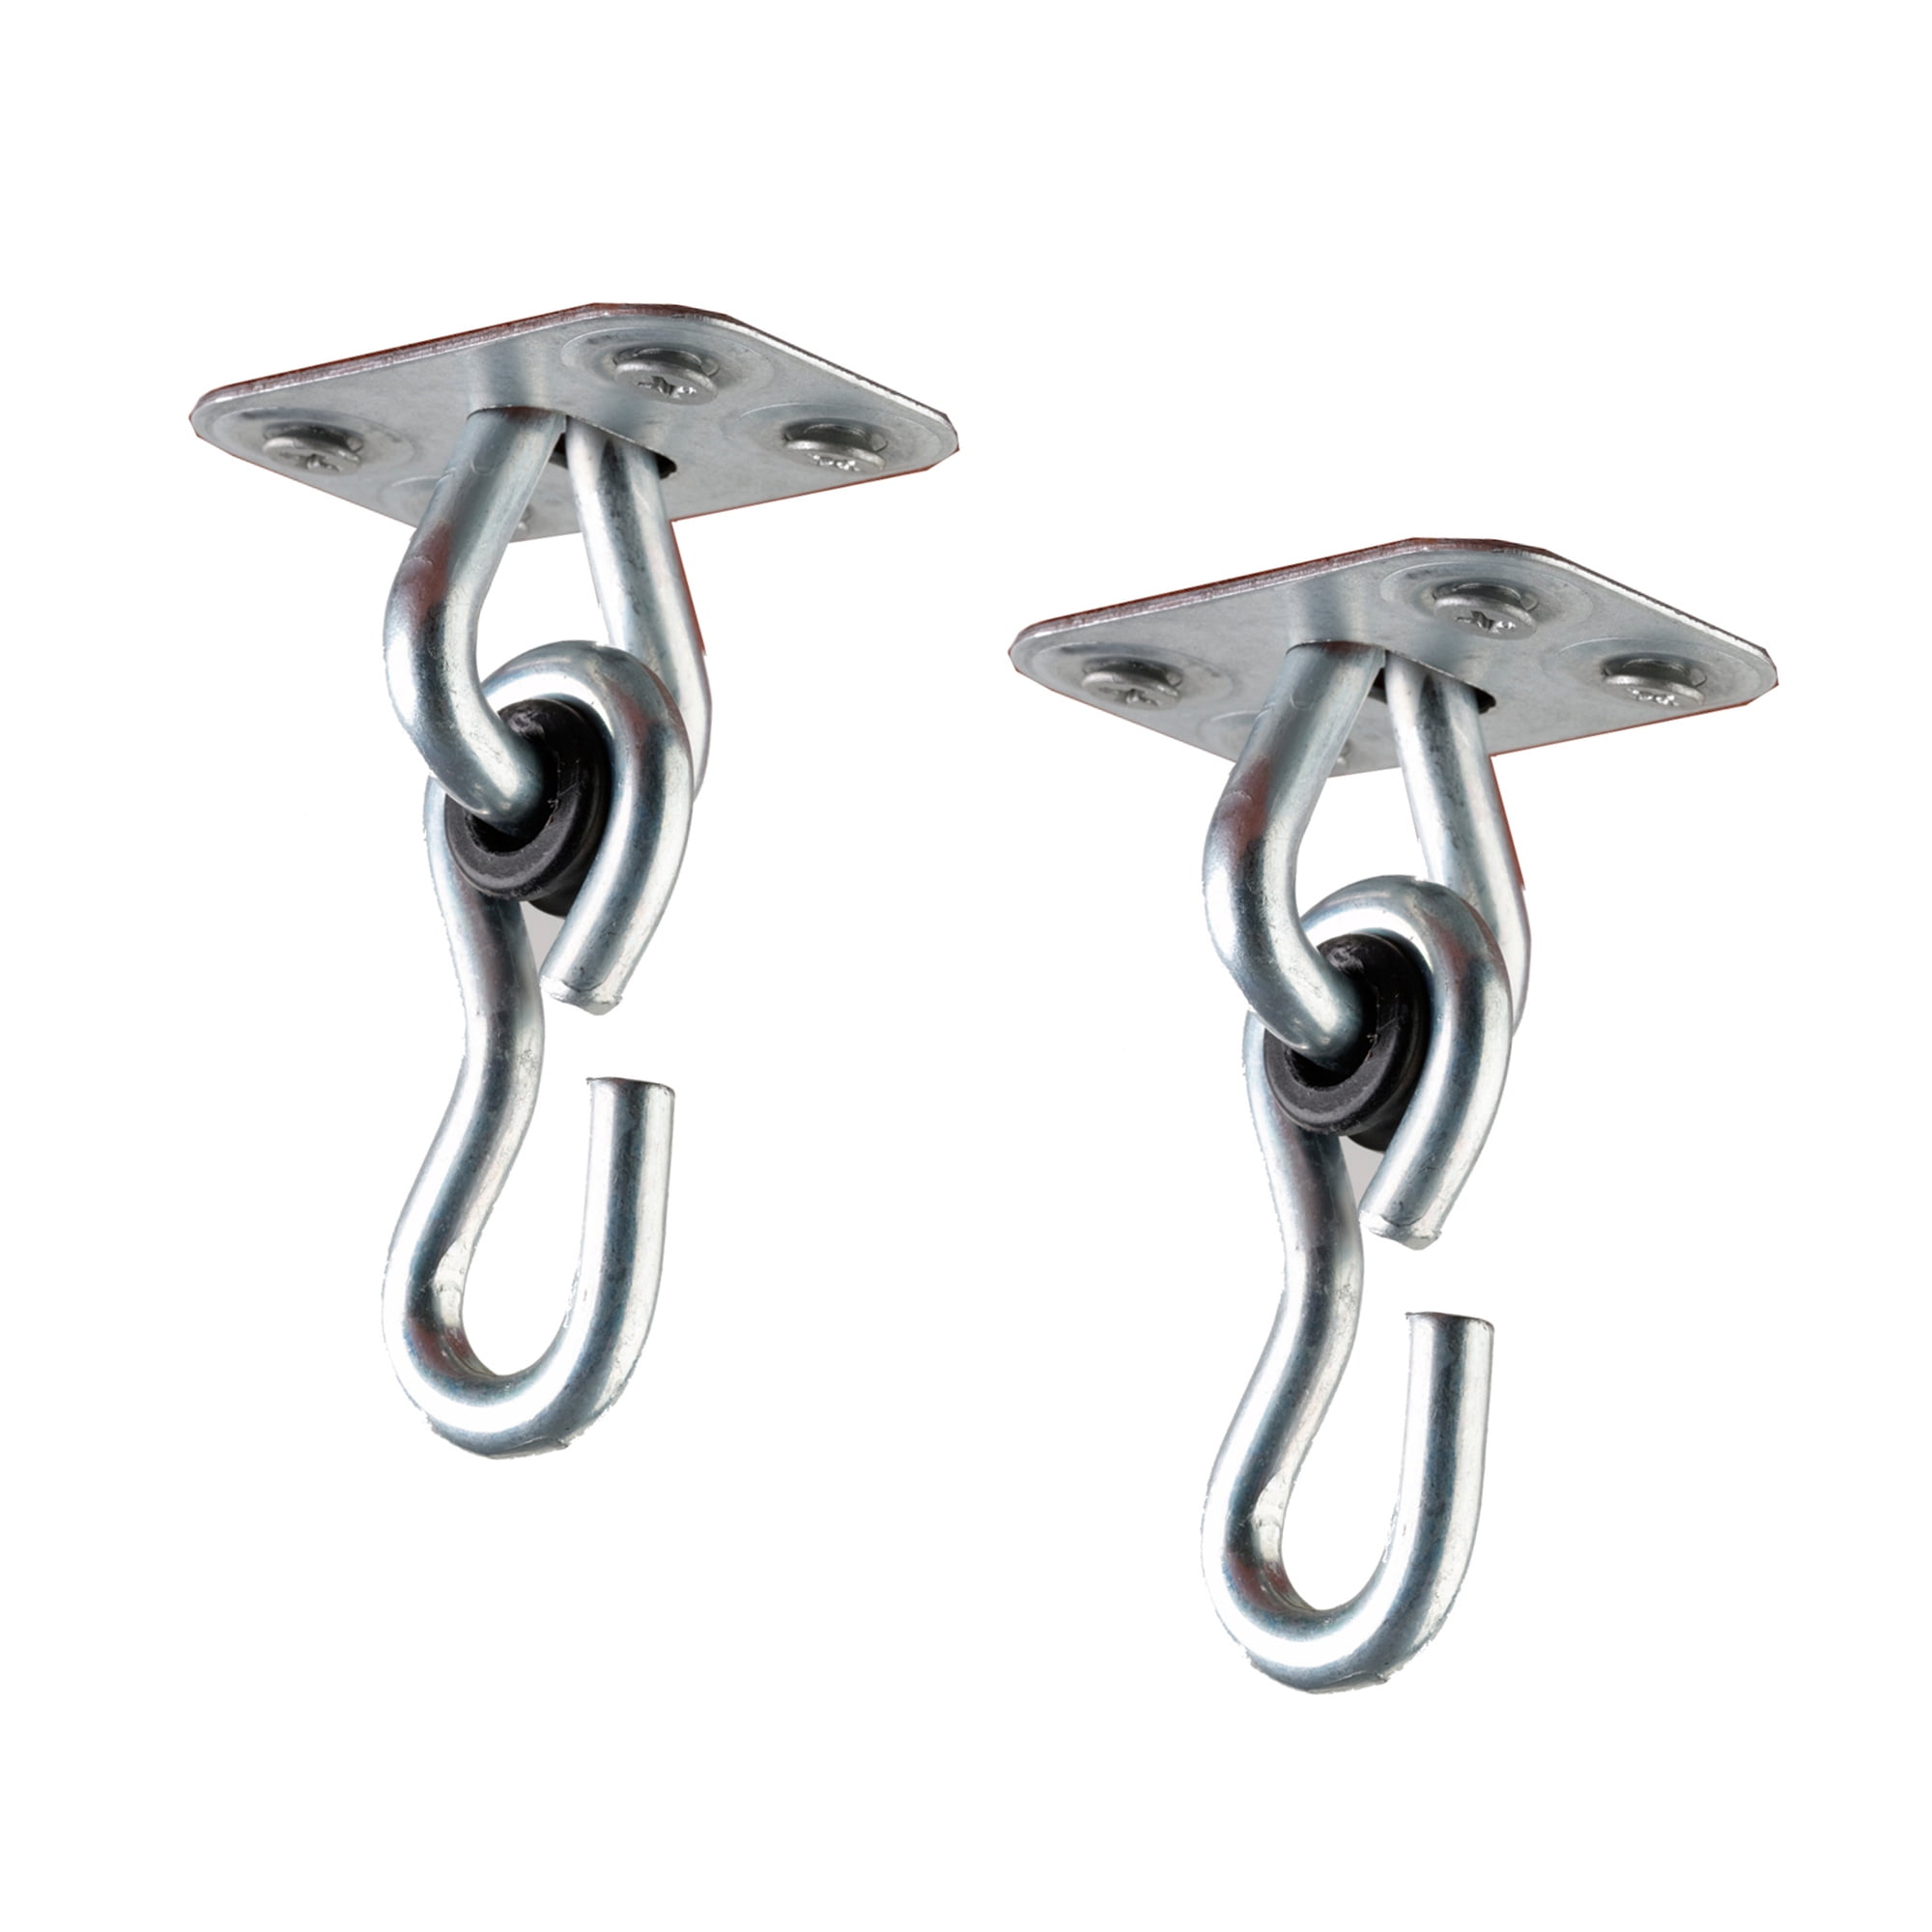 Details about   Aluminum Bearing Heavy Duty Swing Hanger for Play & Swing Sets 2 Packs Silver 